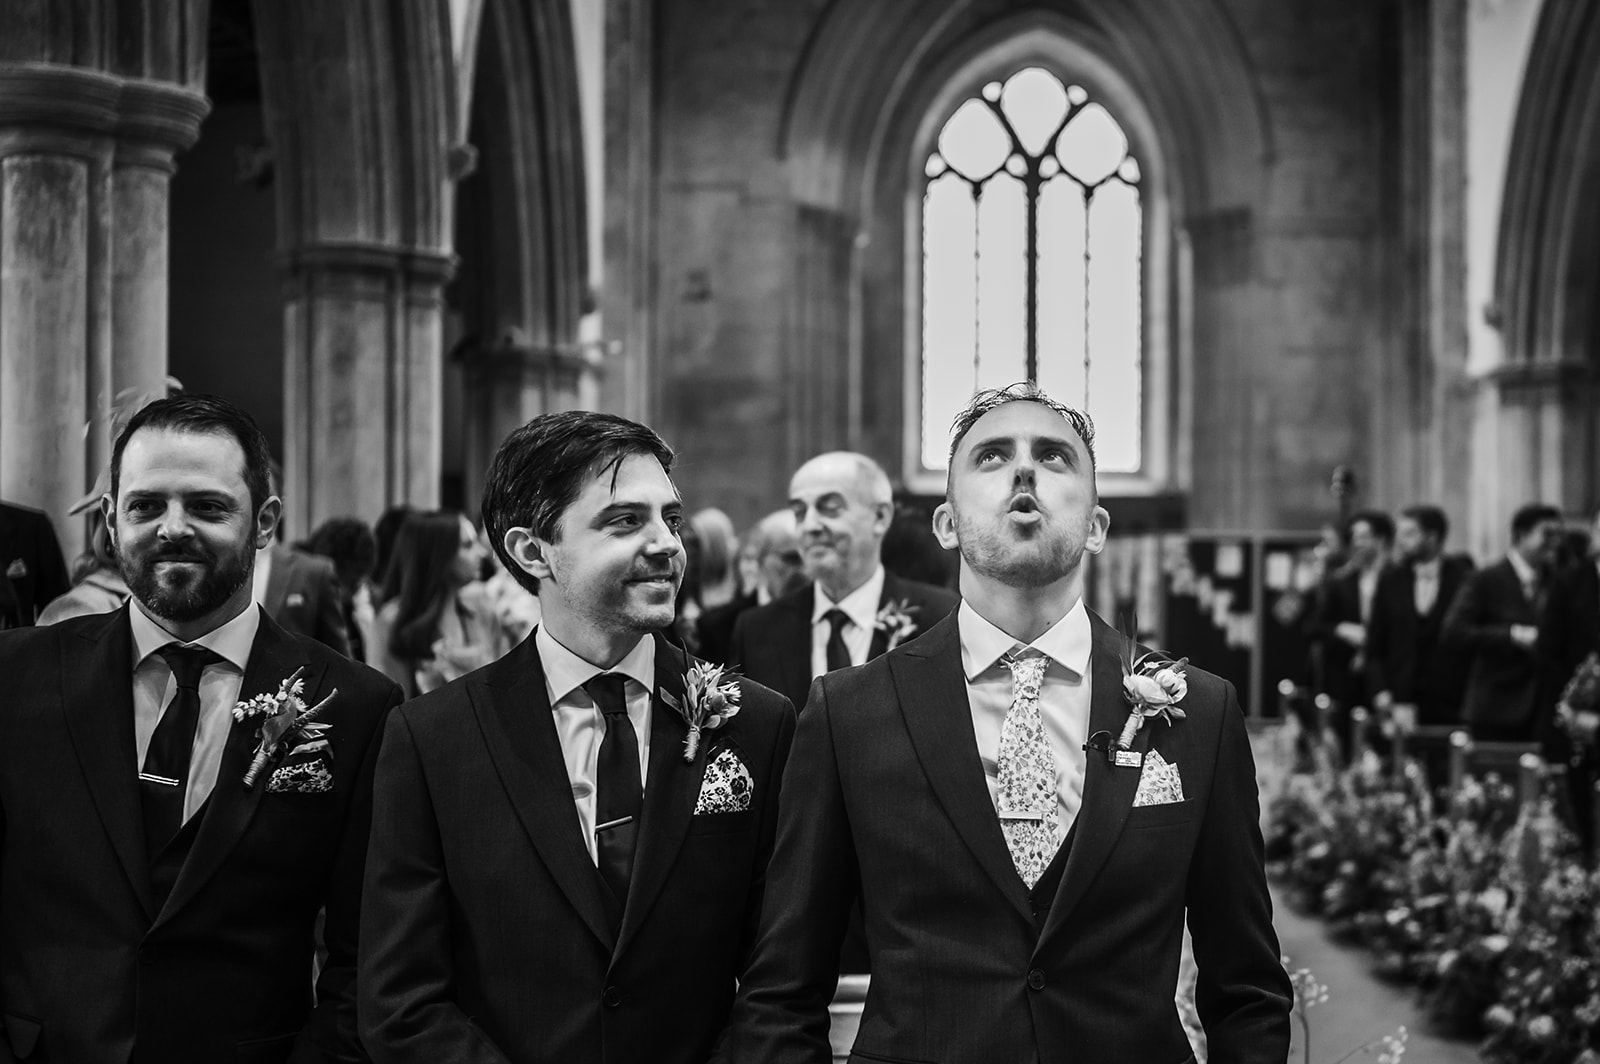 A nervous groom waits for his bride at the end of the aisle